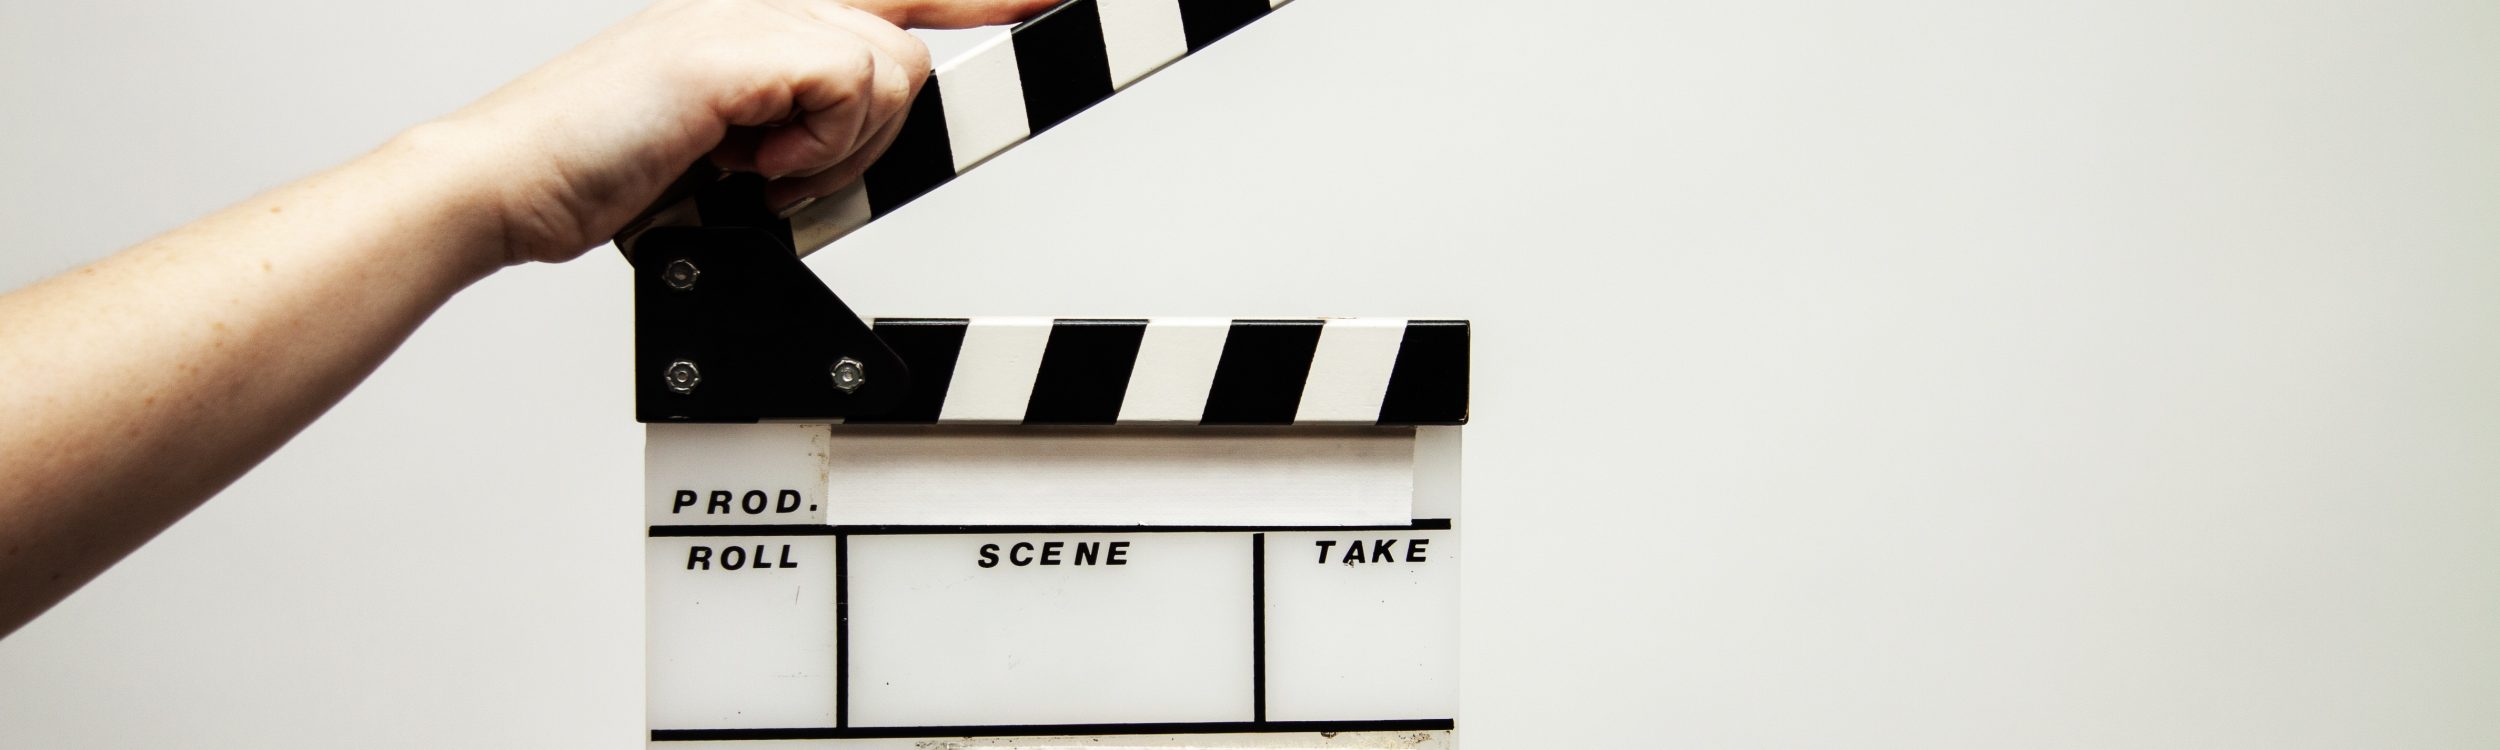 A clapperboard used in video production